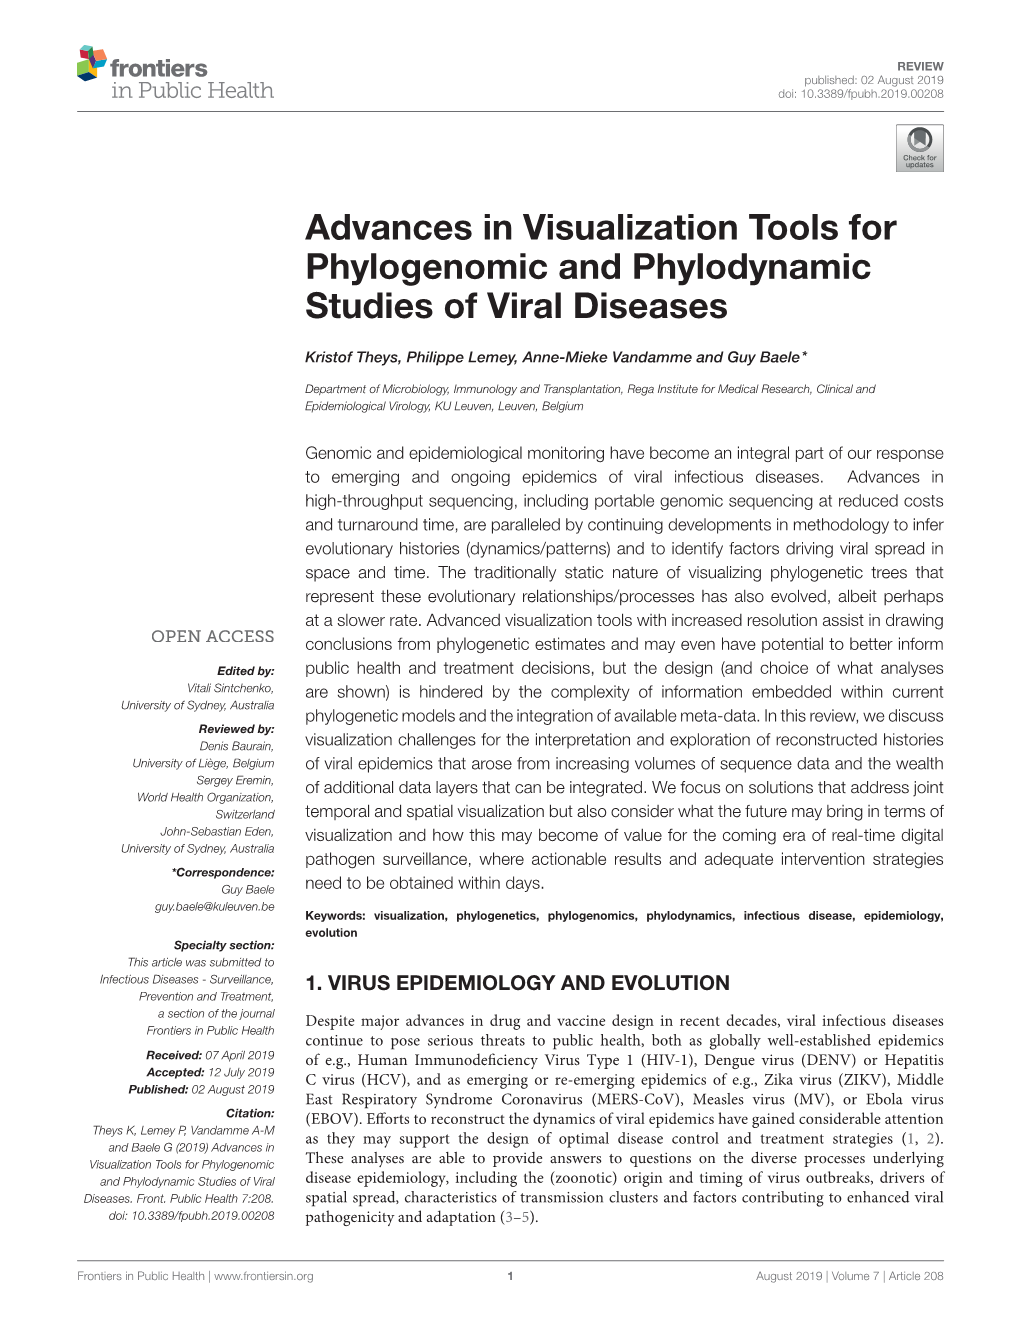 Advances in Visualization Tools for Phylogenomic and Phylodynamic Studies of Viral Diseases